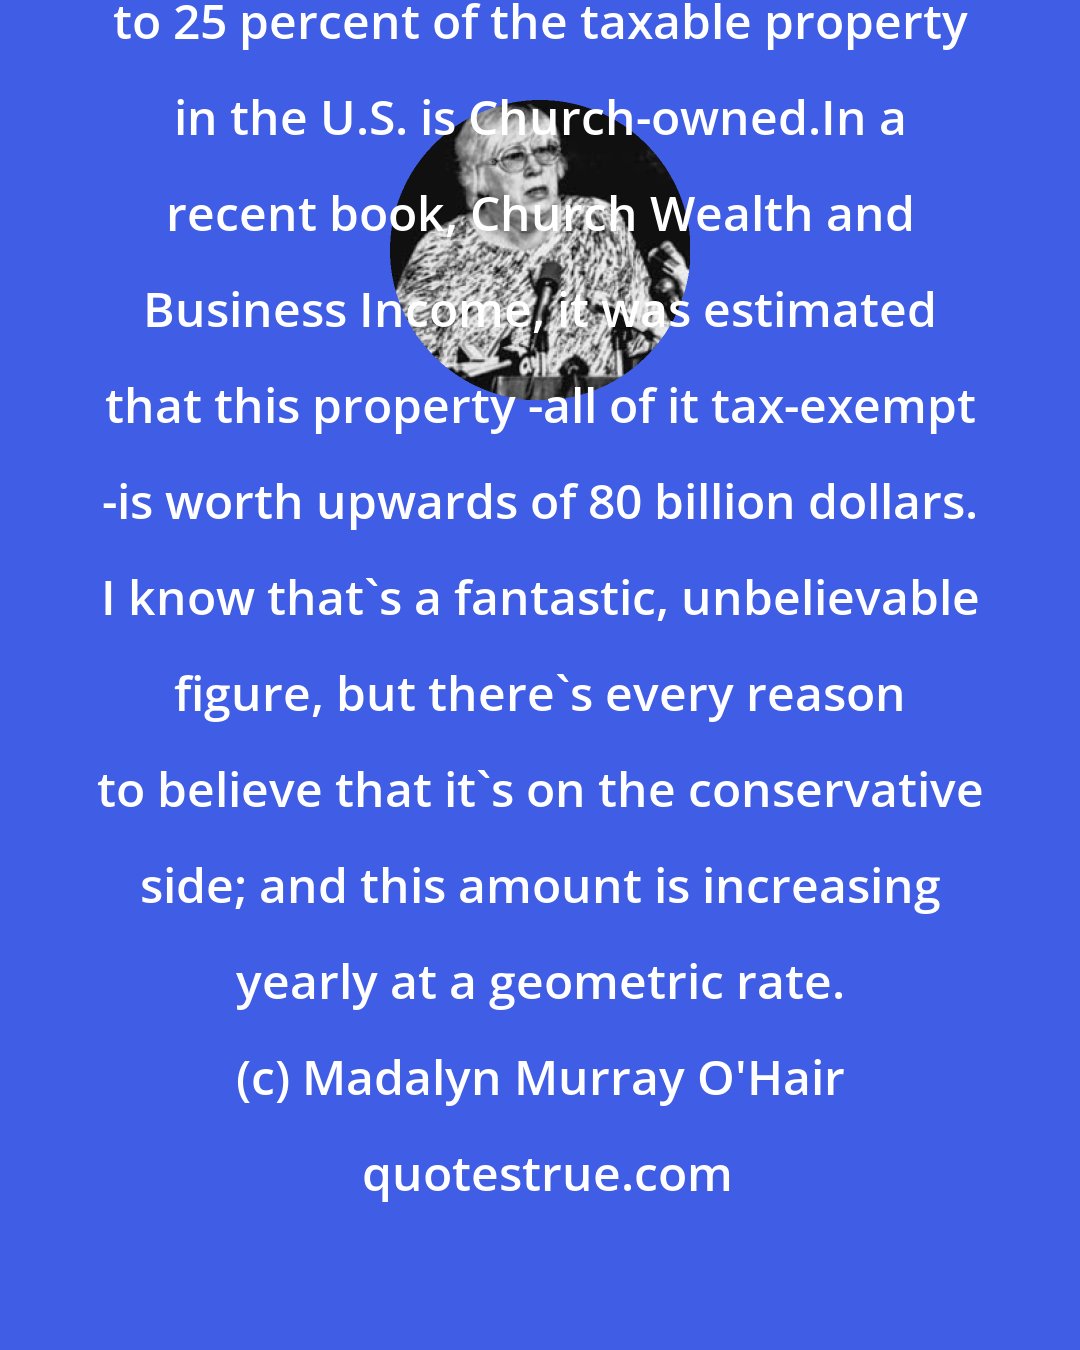 Madalyn Murray O'Hair: I'd make an educated guess that 20 to 25 percent of the taxable property in the U.S. is Church-owned.In a recent book, Church Wealth and Business Income, it was estimated that this property -all of it tax-exempt -is worth upwards of 80 billion dollars. I know that's a fantastic, unbelievable figure, but there's every reason to believe that it's on the conservative side; and this amount is increasing yearly at a geometric rate.